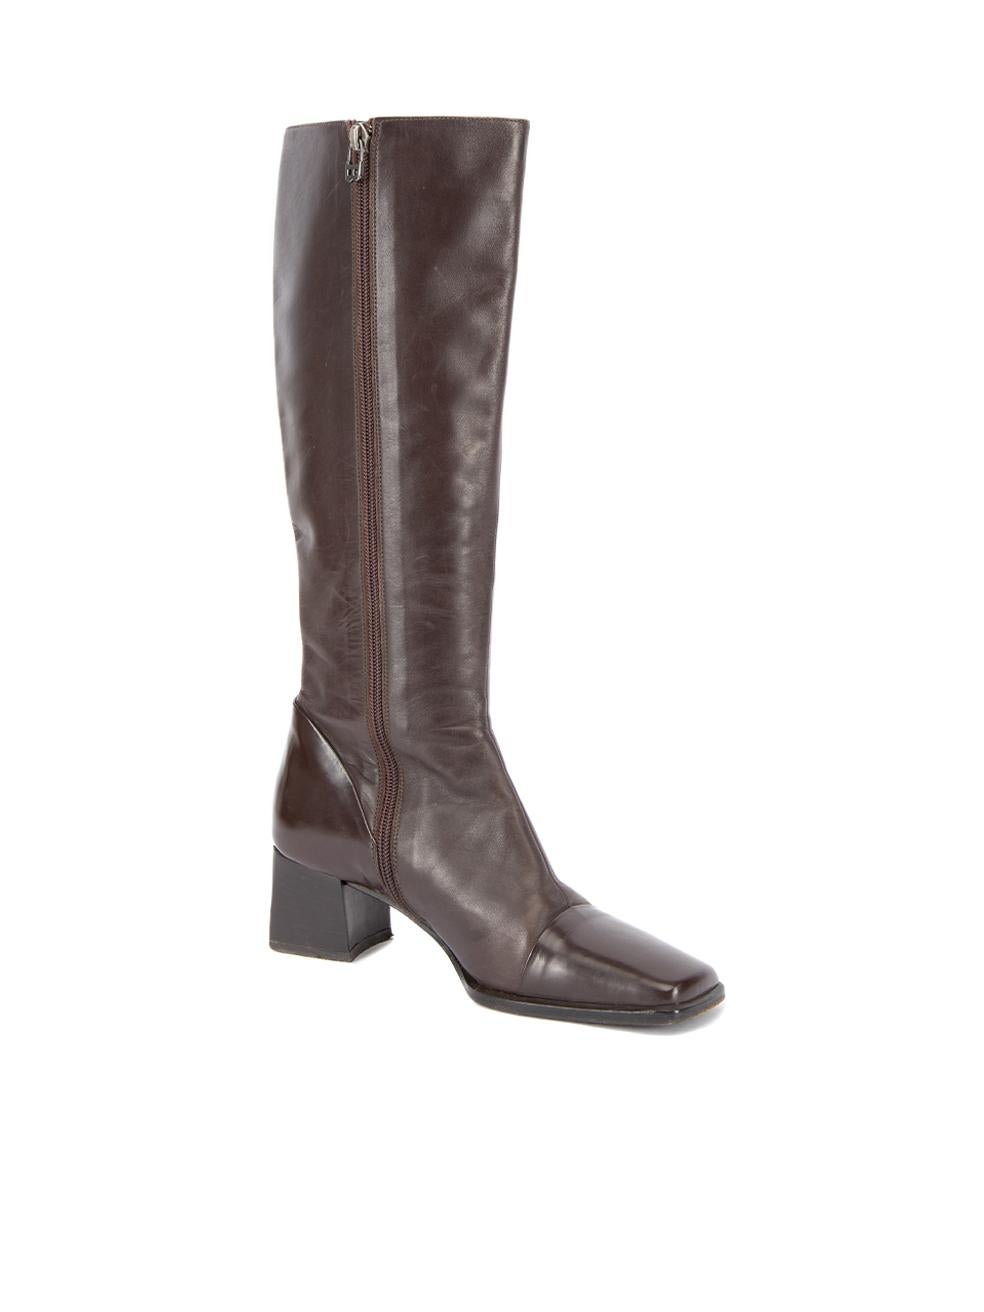 CONDITION is Very good. Minimal wear to boots is evident. Minimal wear and creasing to the exterior leather and scuffs can be seen on this used Bally designer resale item.   Details  Brown Leather Knee high boots Square toe Kitten block heel Side